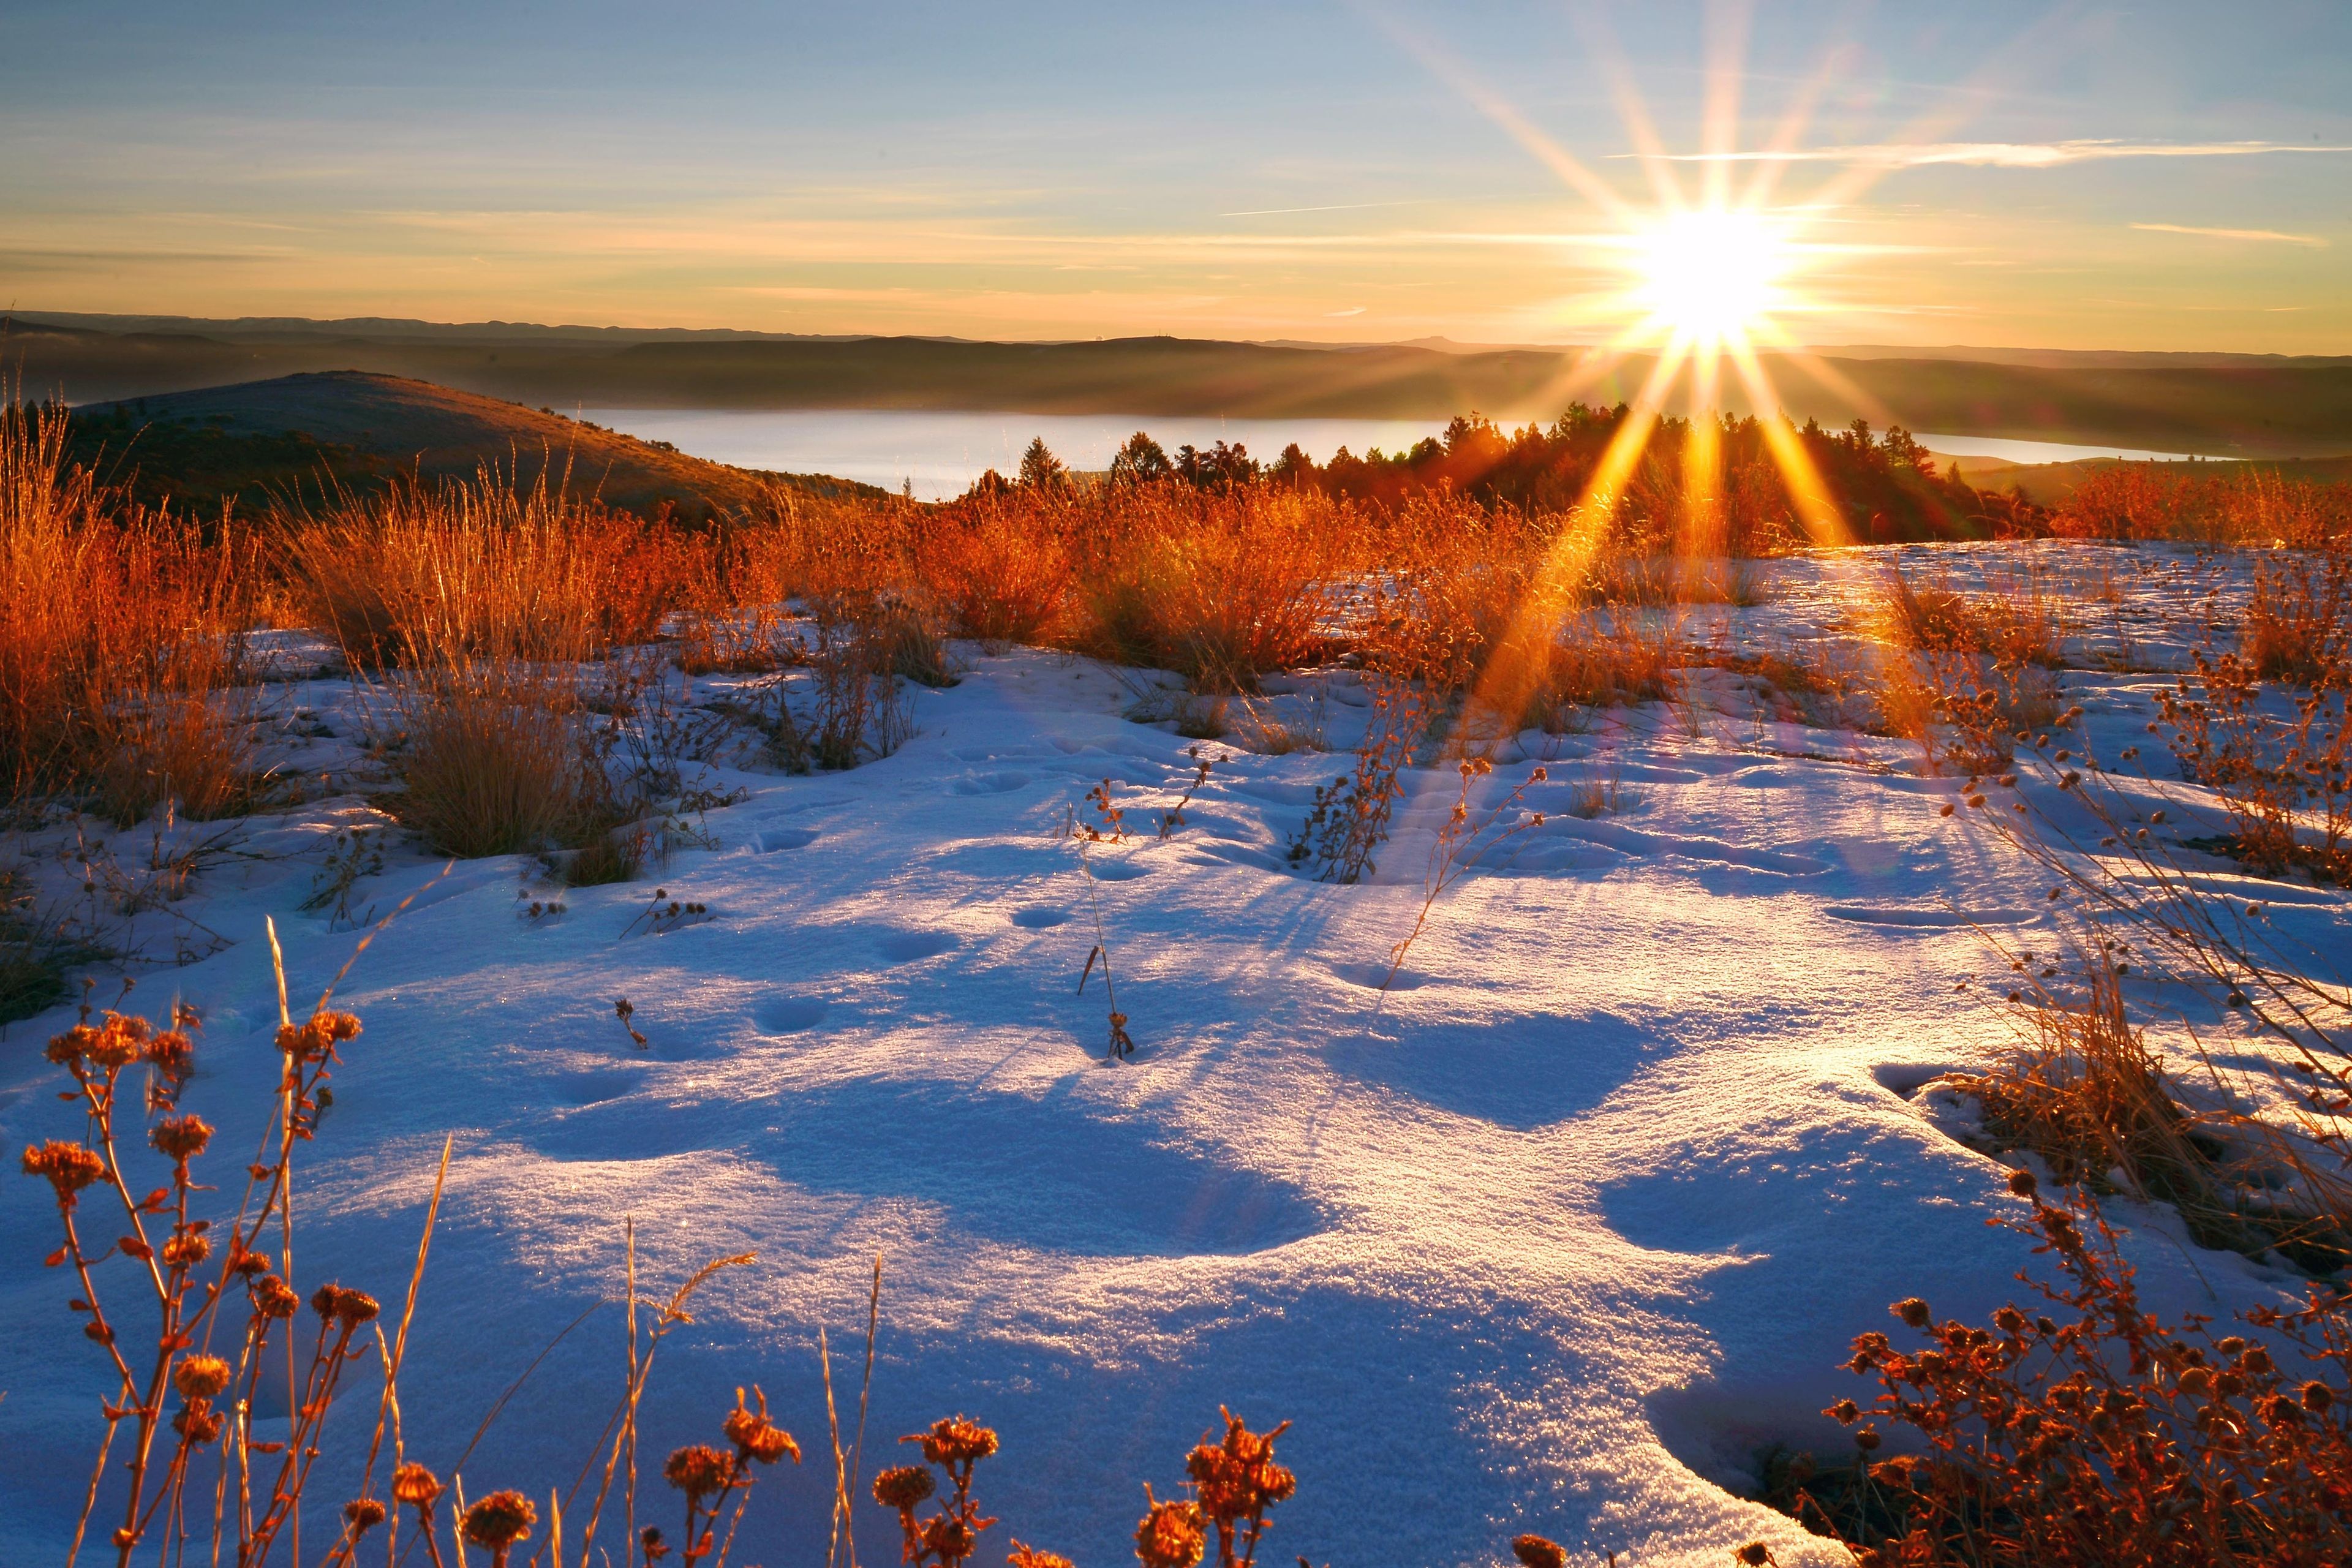 The sun rises over a lake surrounded by snow.